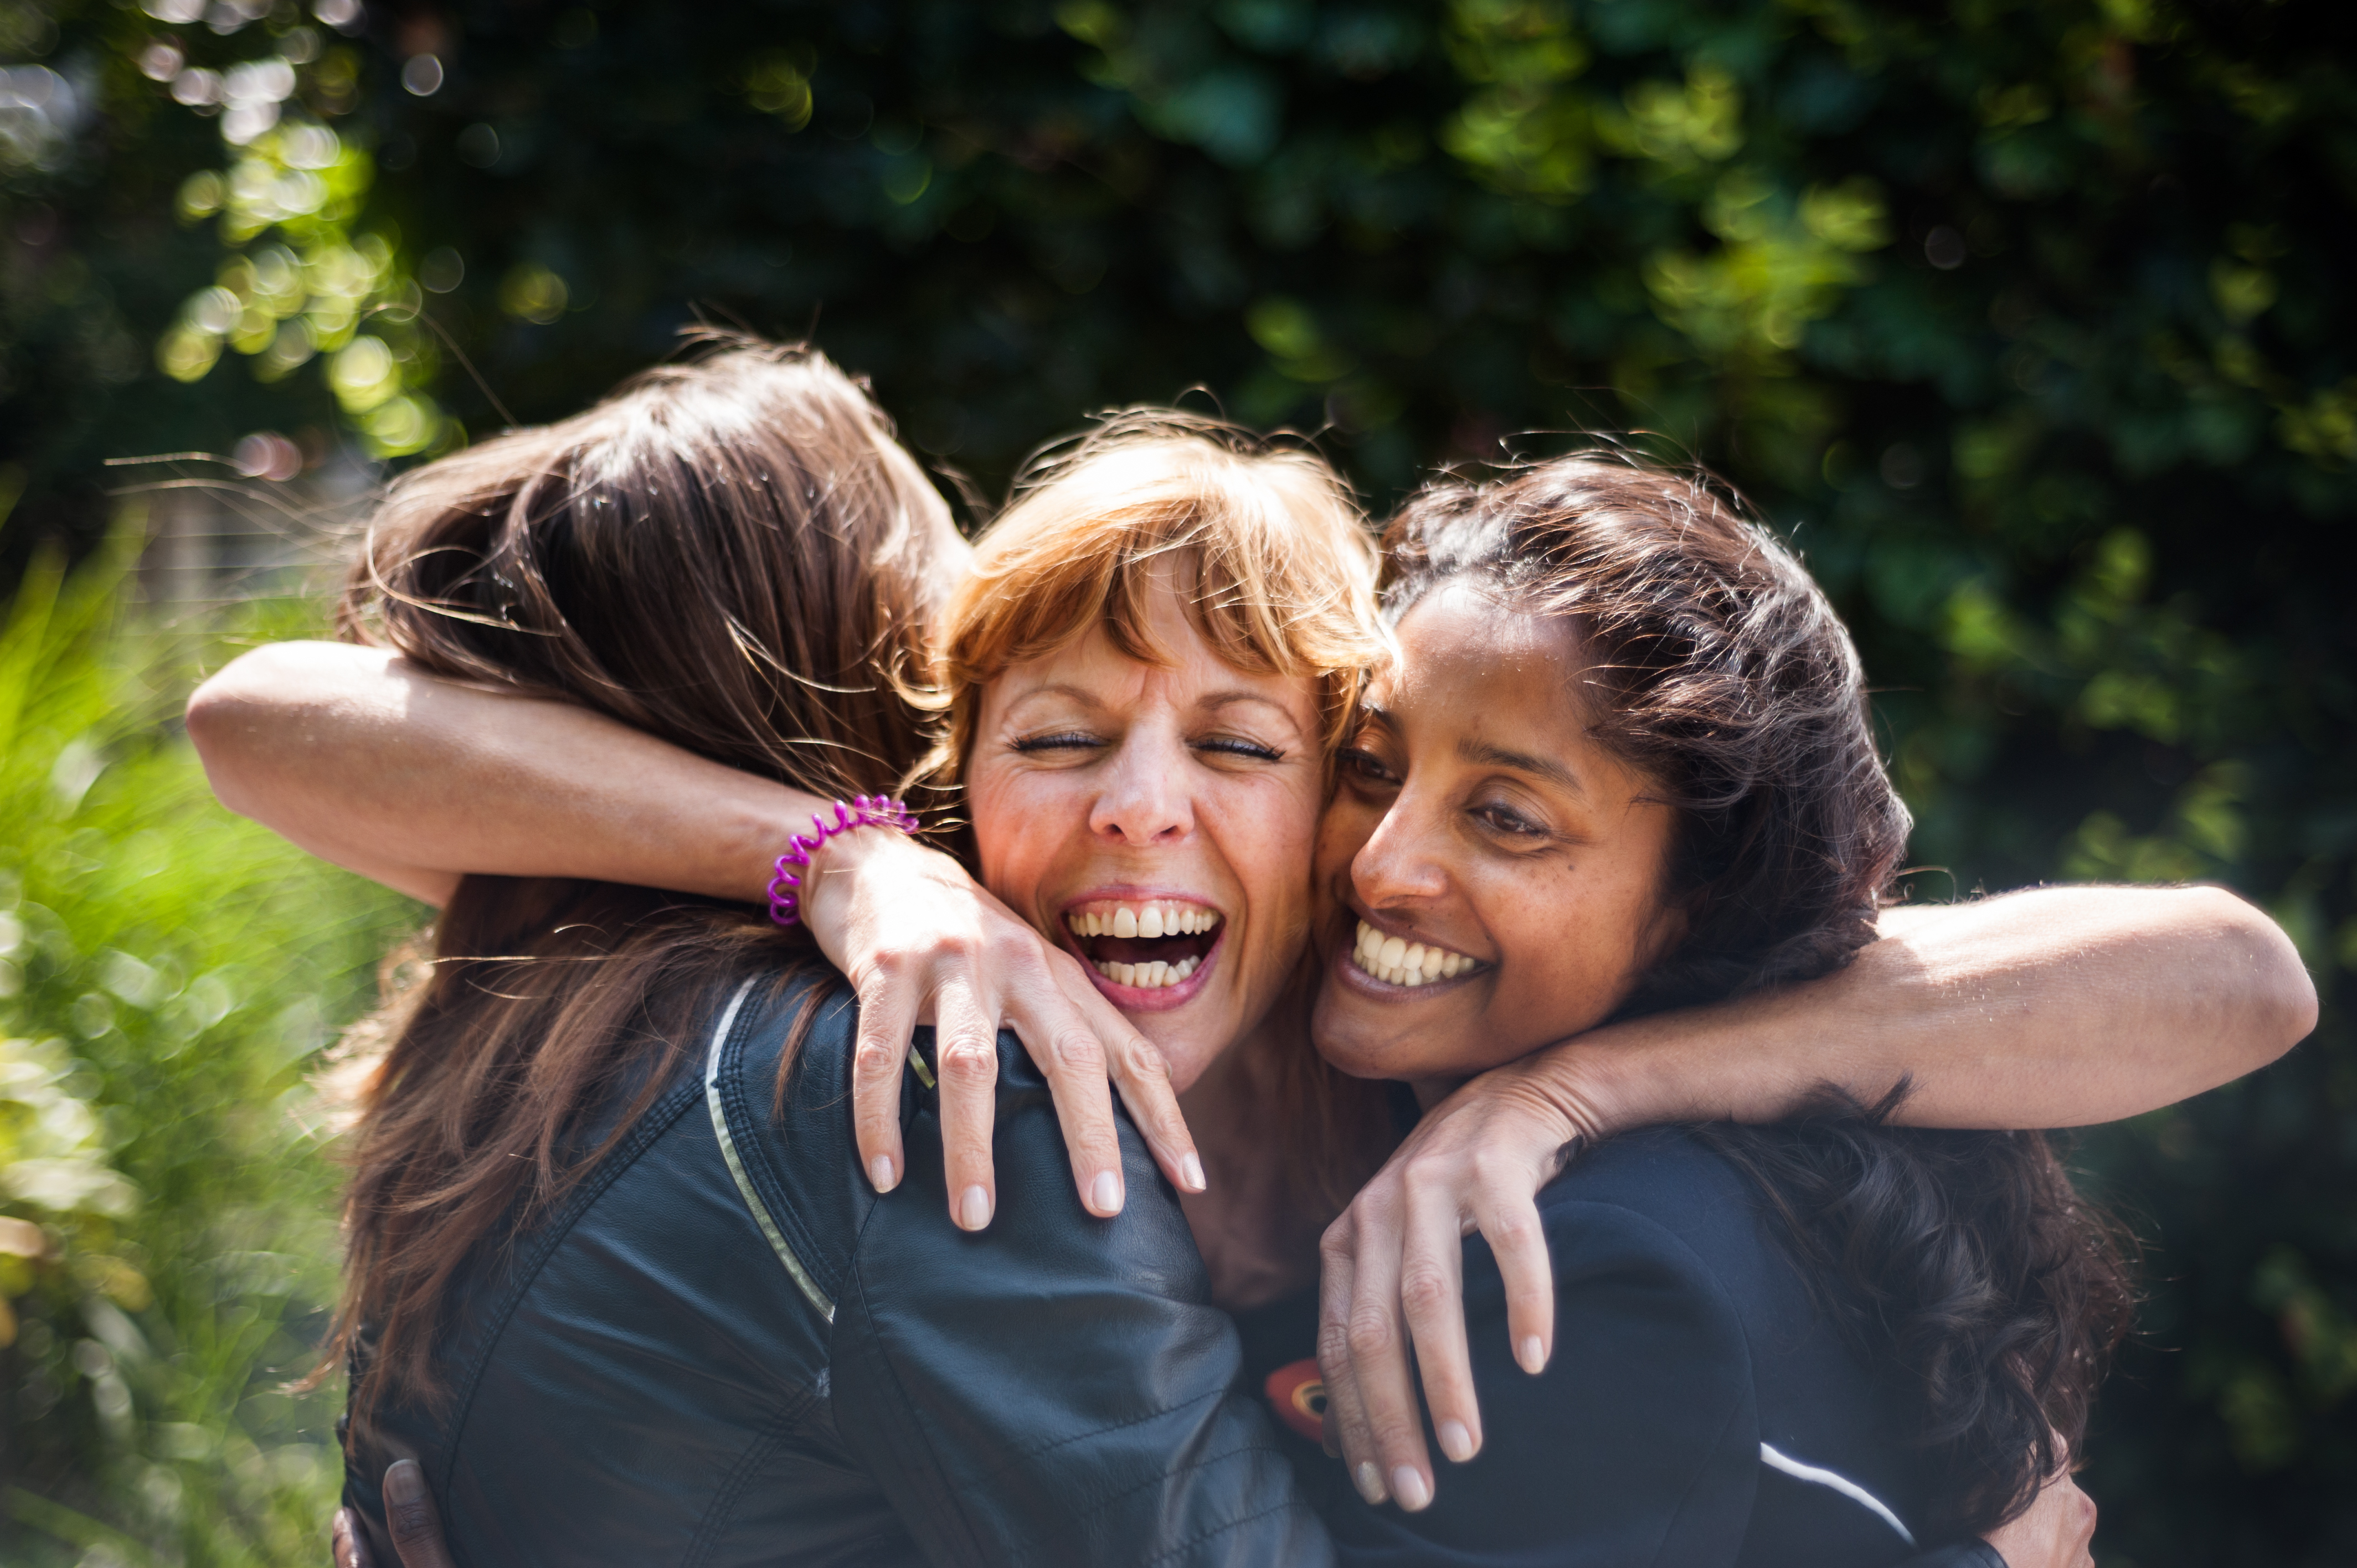 Three middle-aged women embrace each other and laugh together.